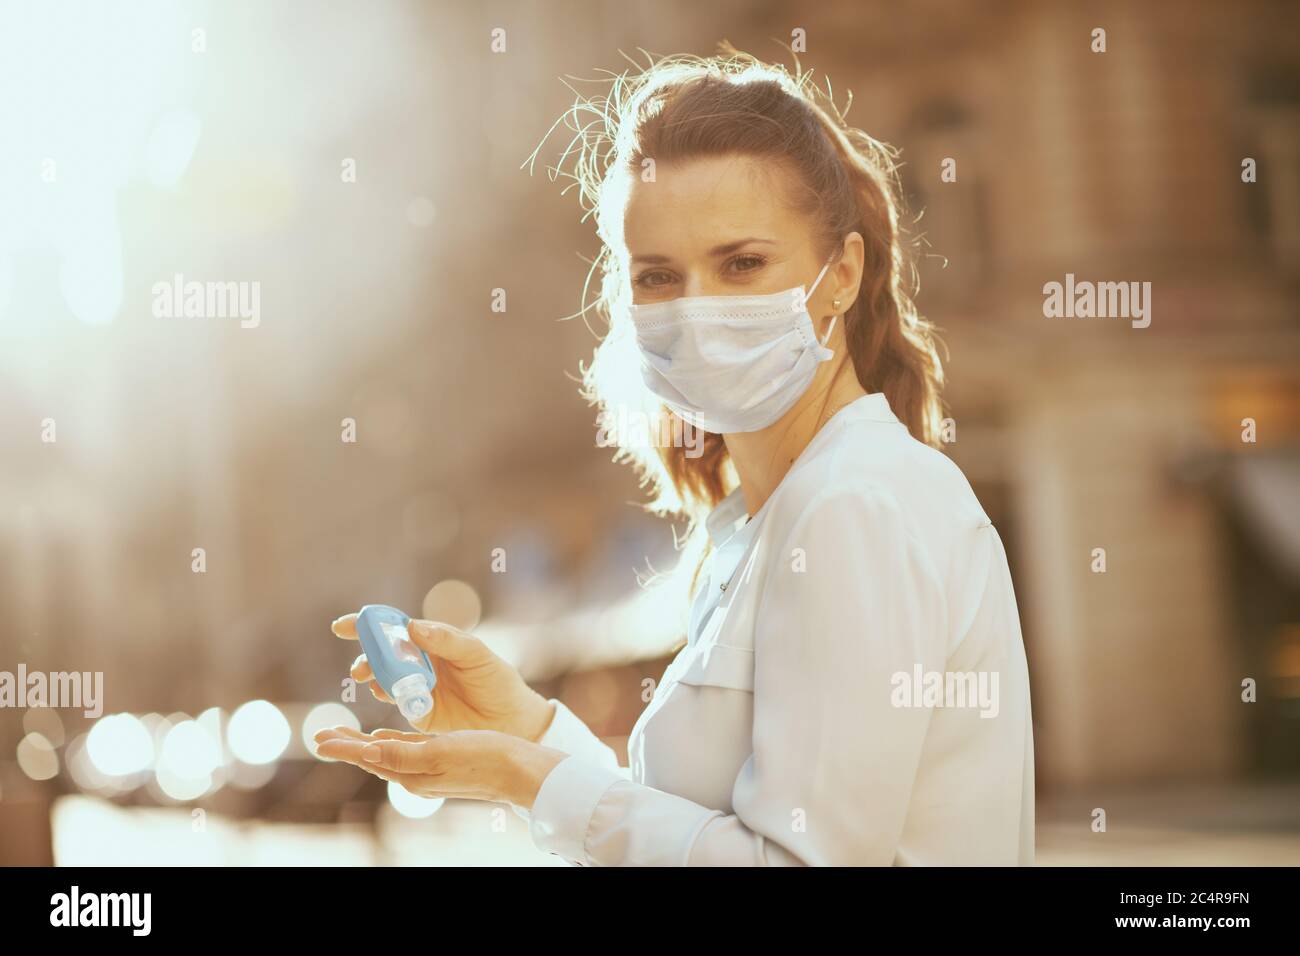 Life during coronavirus pandemic. modern 40 years old woman in blue blouse with medical mask disinfecting hands with sanitizer outdoors in the city. Stock Photo